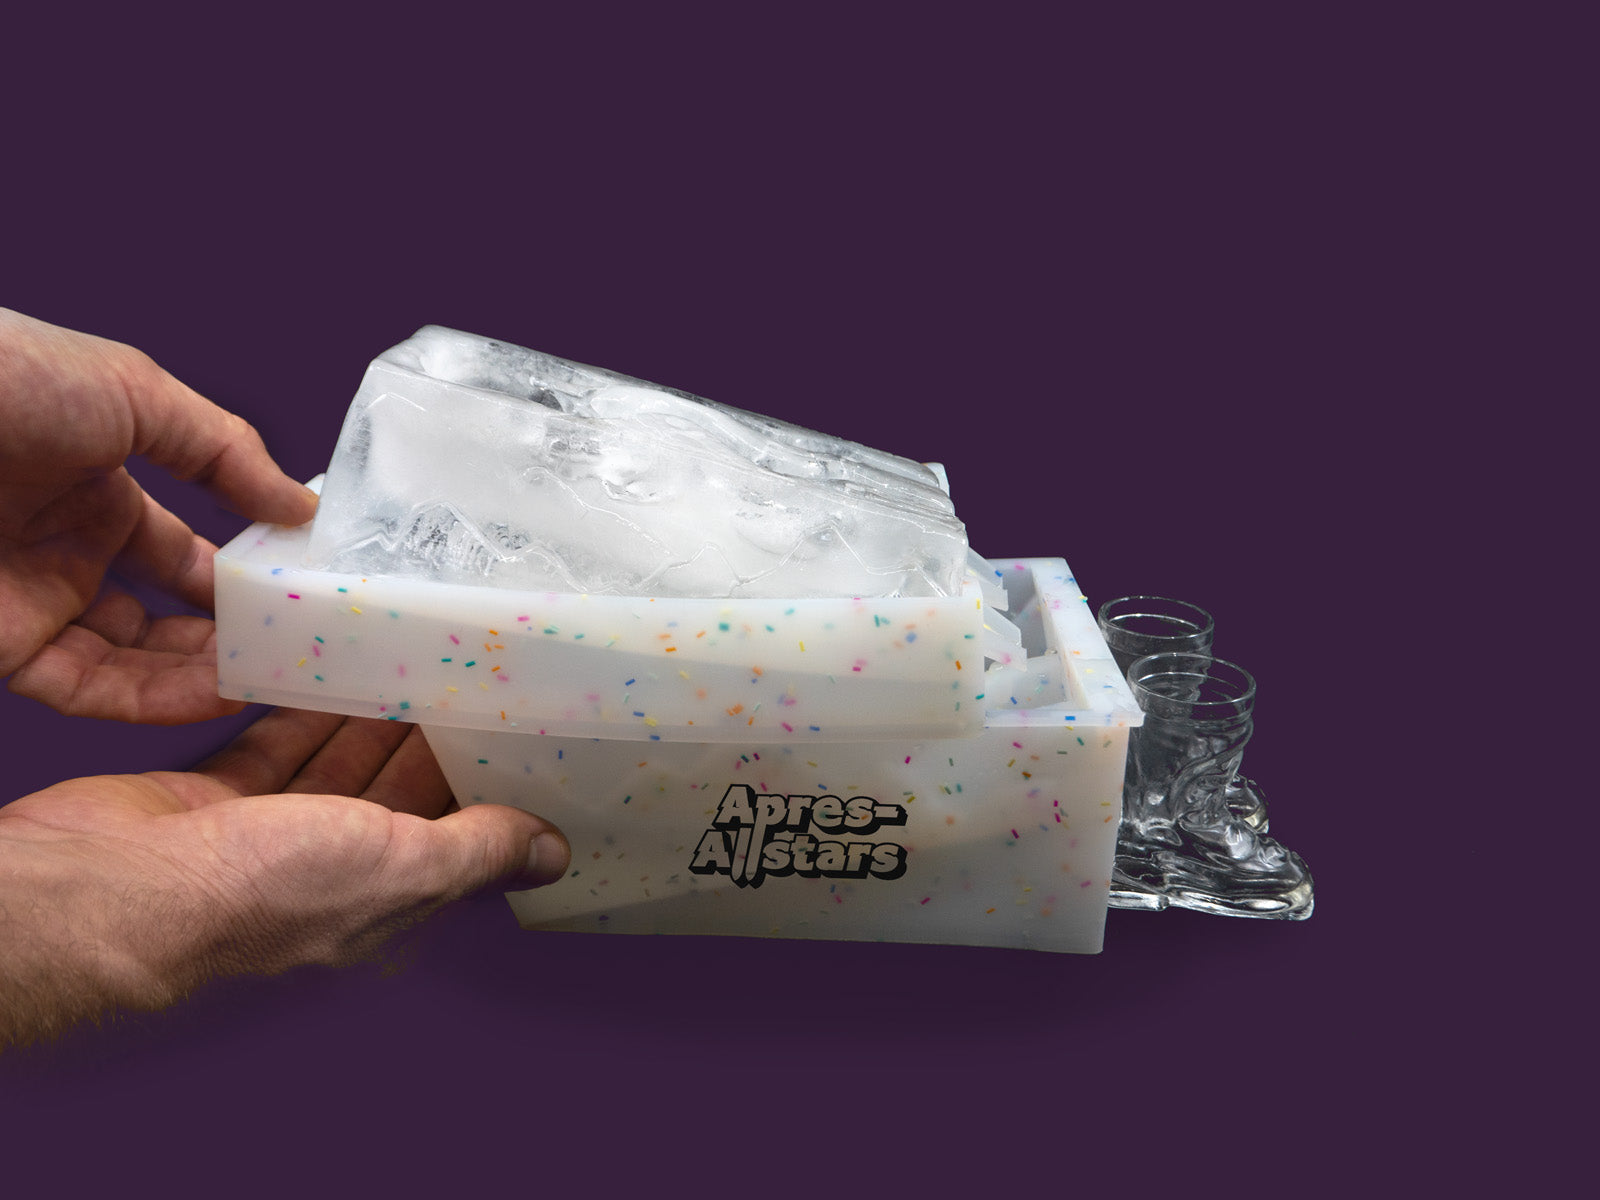 Photo of a white speckled plastic mould, with a block of ice on top that has been molded in the shape of a slalom slope, with 2 funnels within the ice through which liquor is poured into waiting shots glasses shaped like ski boots. The image is set against a purple backdrop, viewed from the right hand side. A pair of hands are moving the top and bottom of the plastic mold.